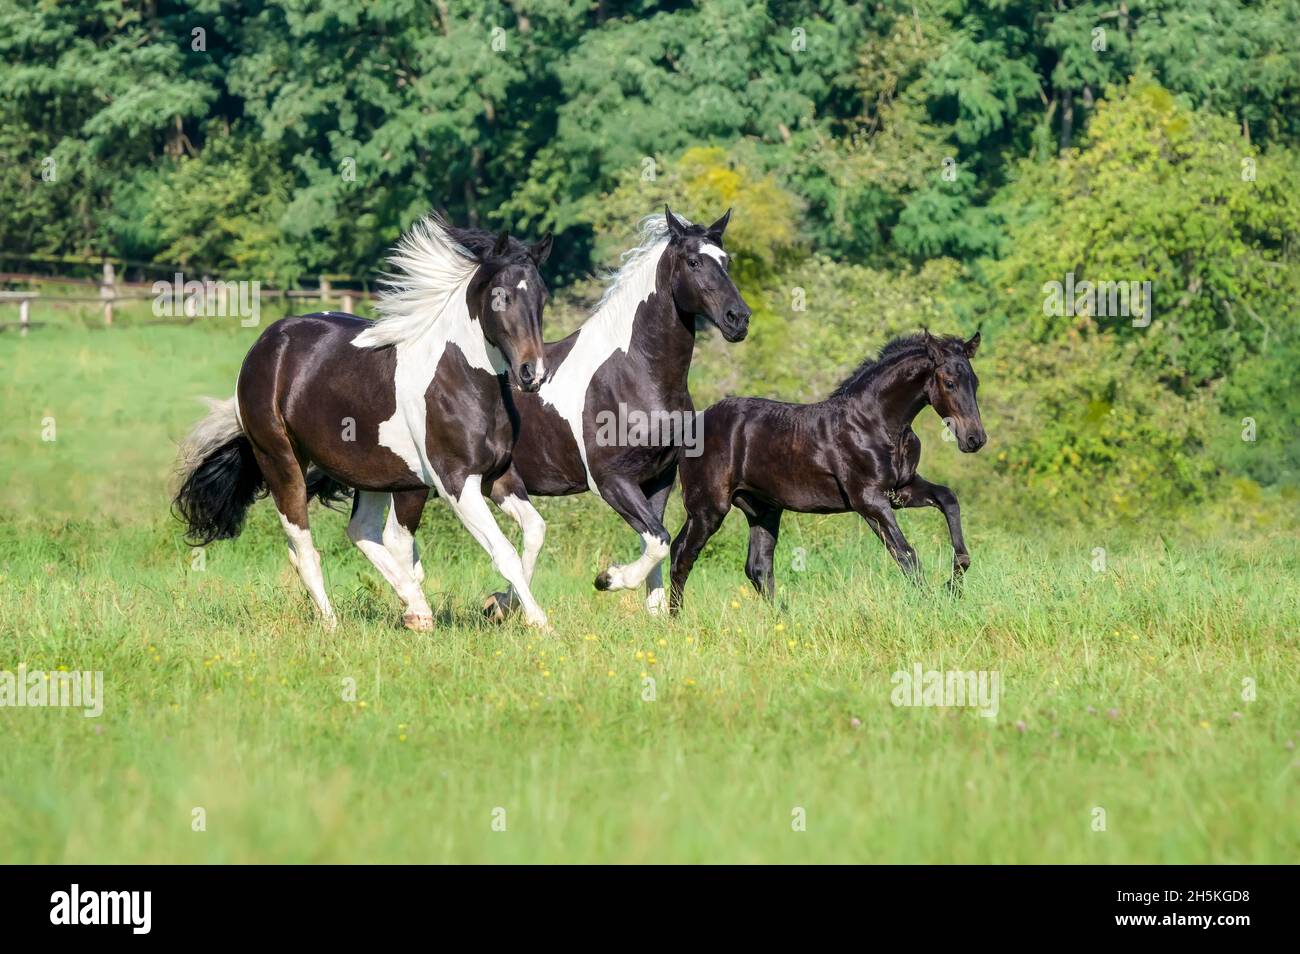 Three horses, warmblood horse baroque type, barock pinto, a cute 3 month old foal, barock black, running together with its dam and 2 years old sister Stock Photo